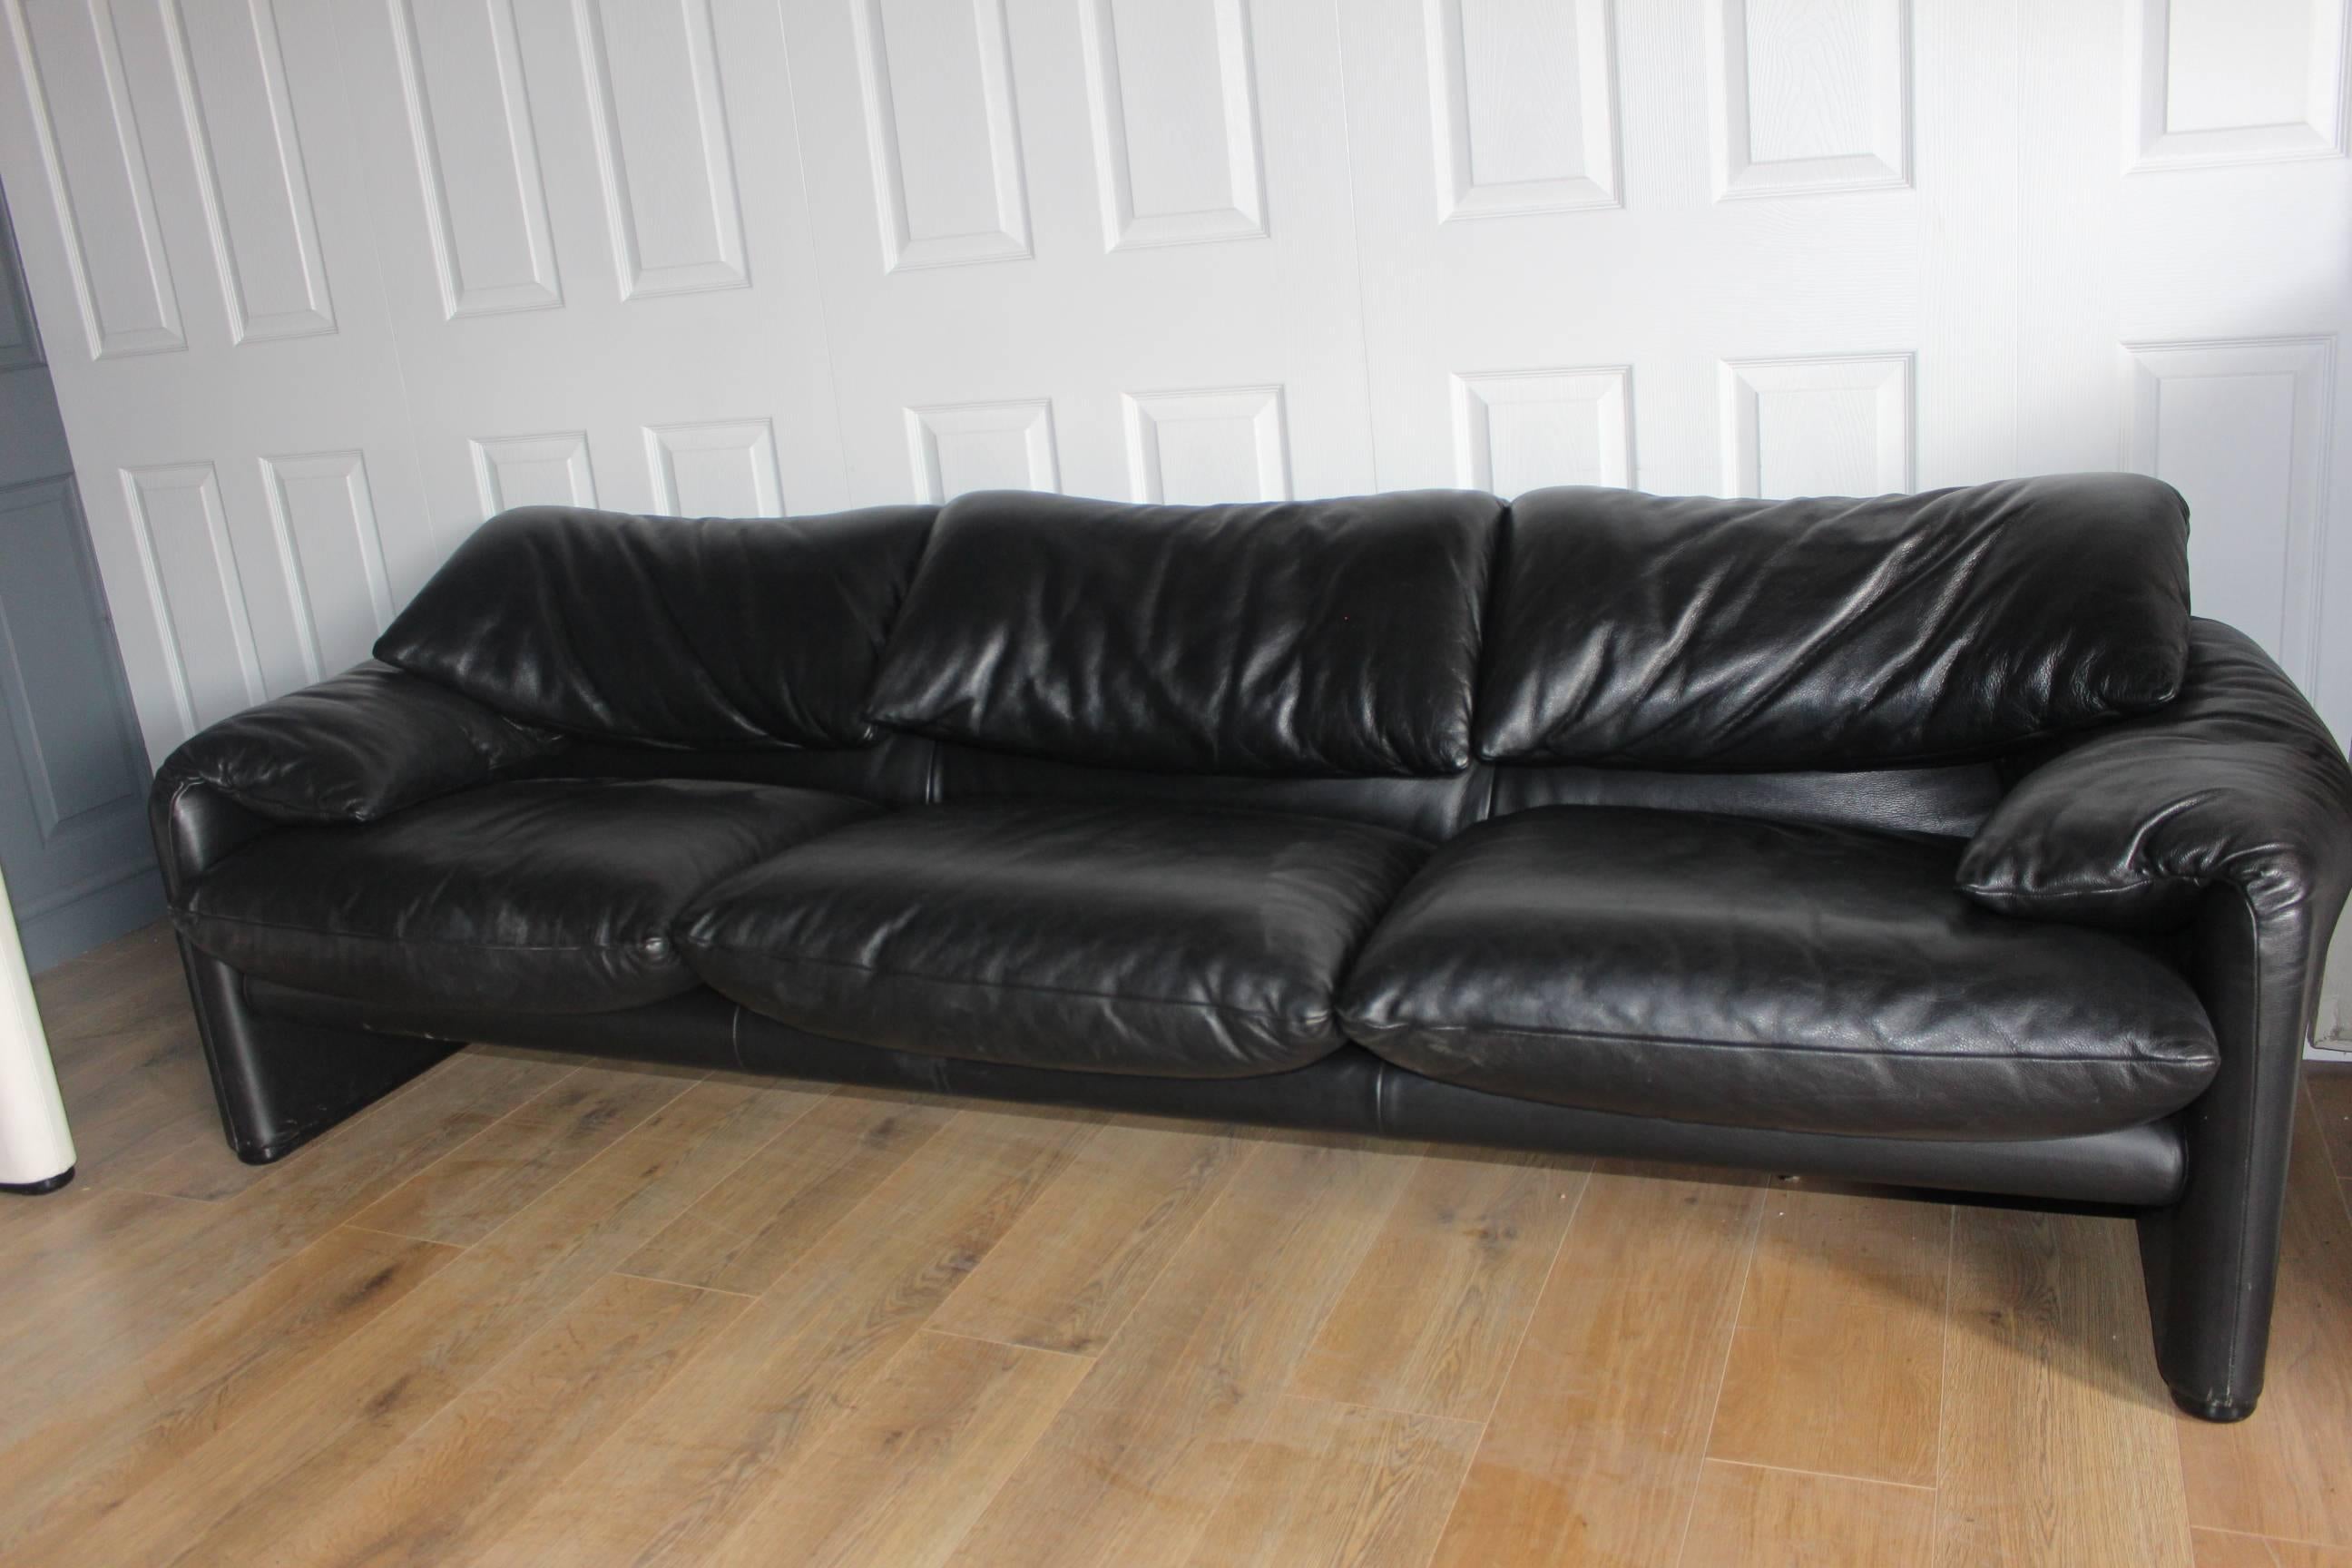 Designer Cassina Maralunga by Vico Magistretti black leather three-seat sofa 
RRP £9072 currently
great quality piece of furniture from well known designer 
very good clean condition
well cared for
head mechanism works fine
iconic design

The